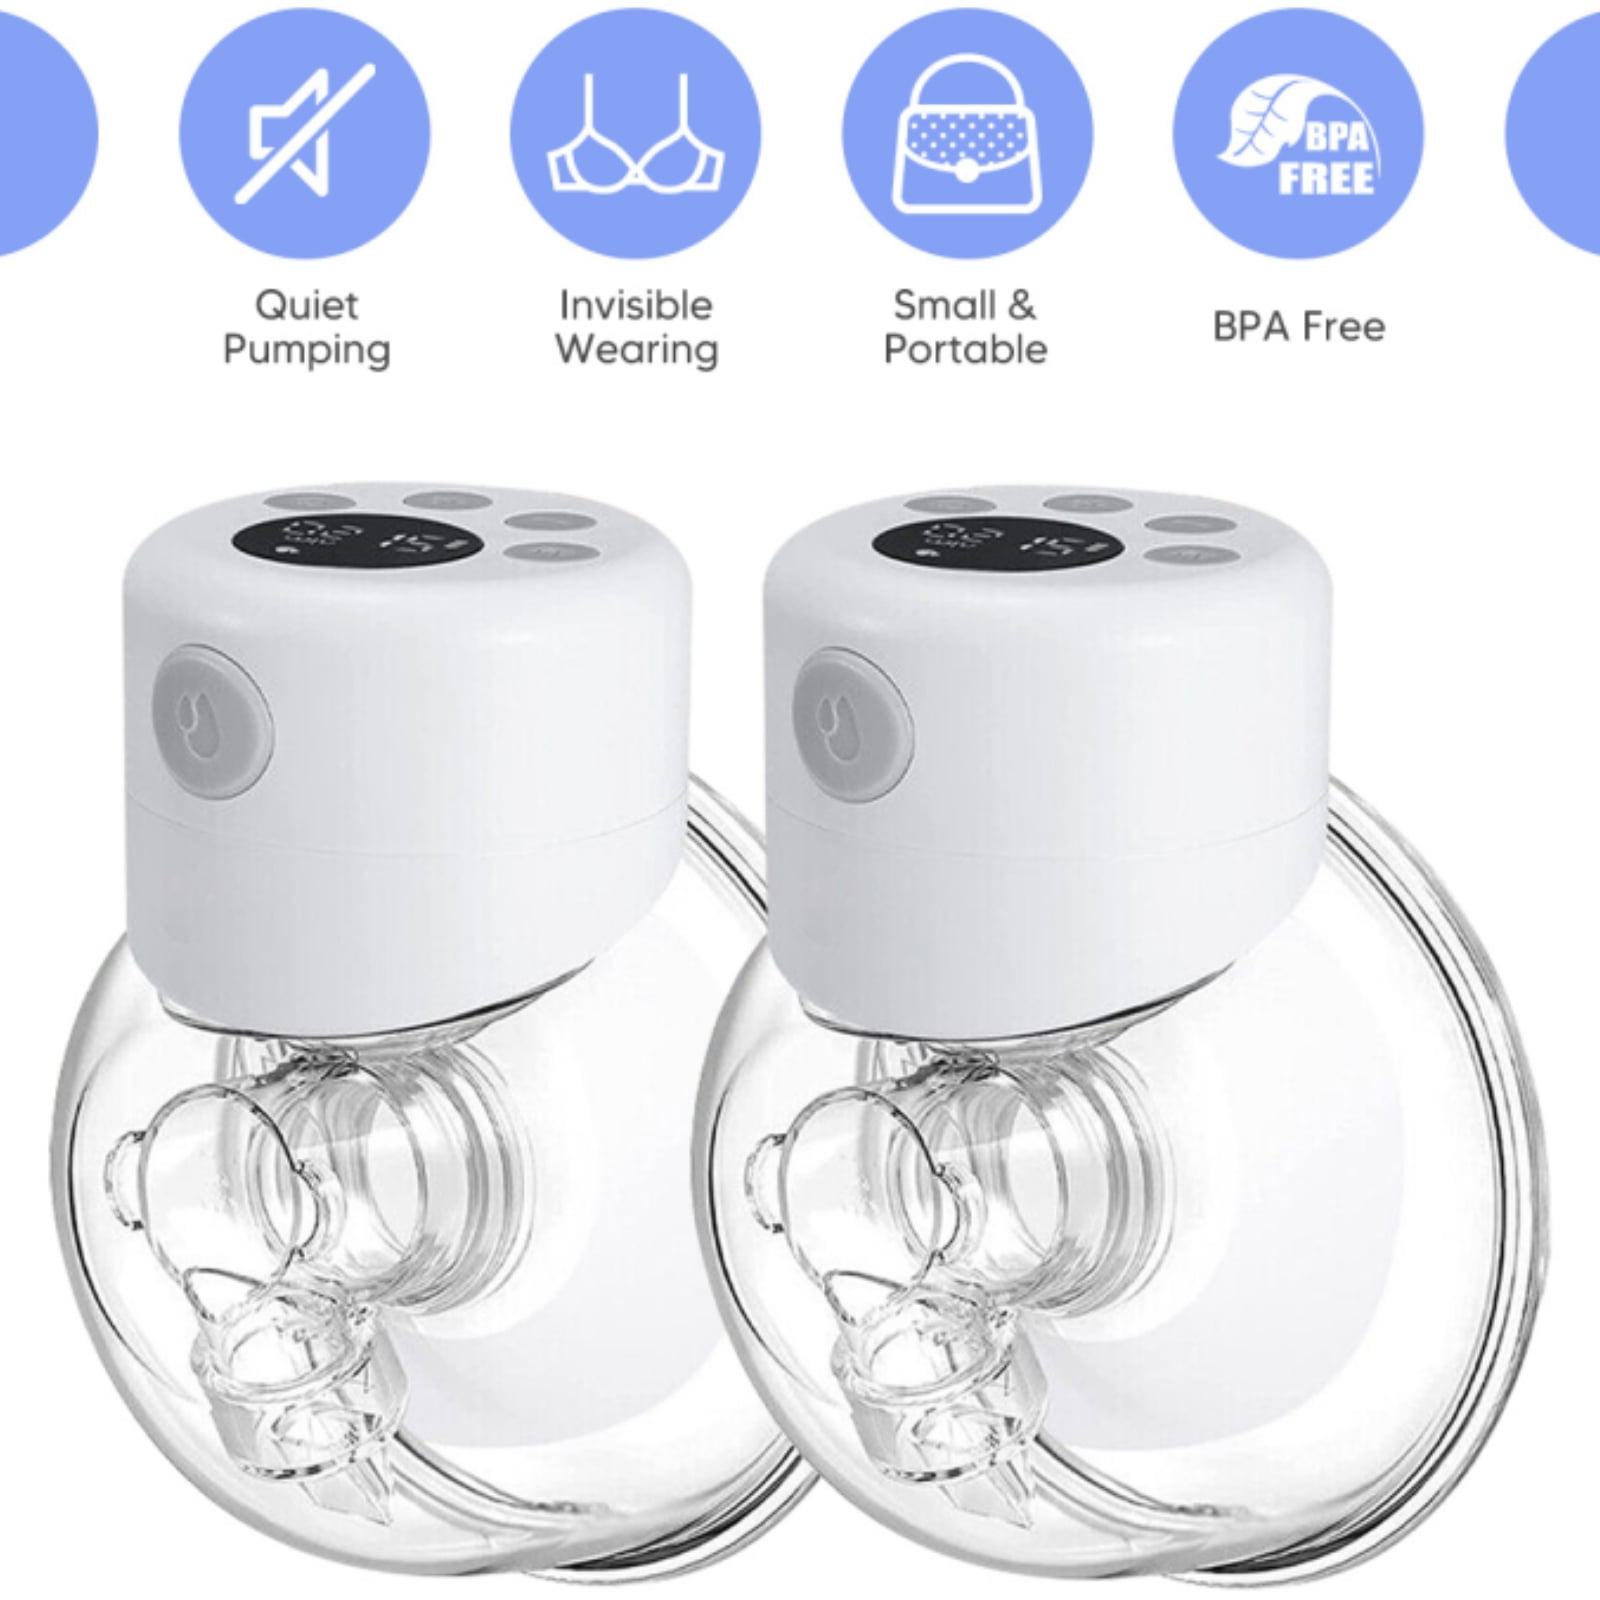 Electric Wearable Breast Pump  Rechargeable Hands-Free & Portable Breast  Pump with 2 Modes 9 Levels. - NextMamas